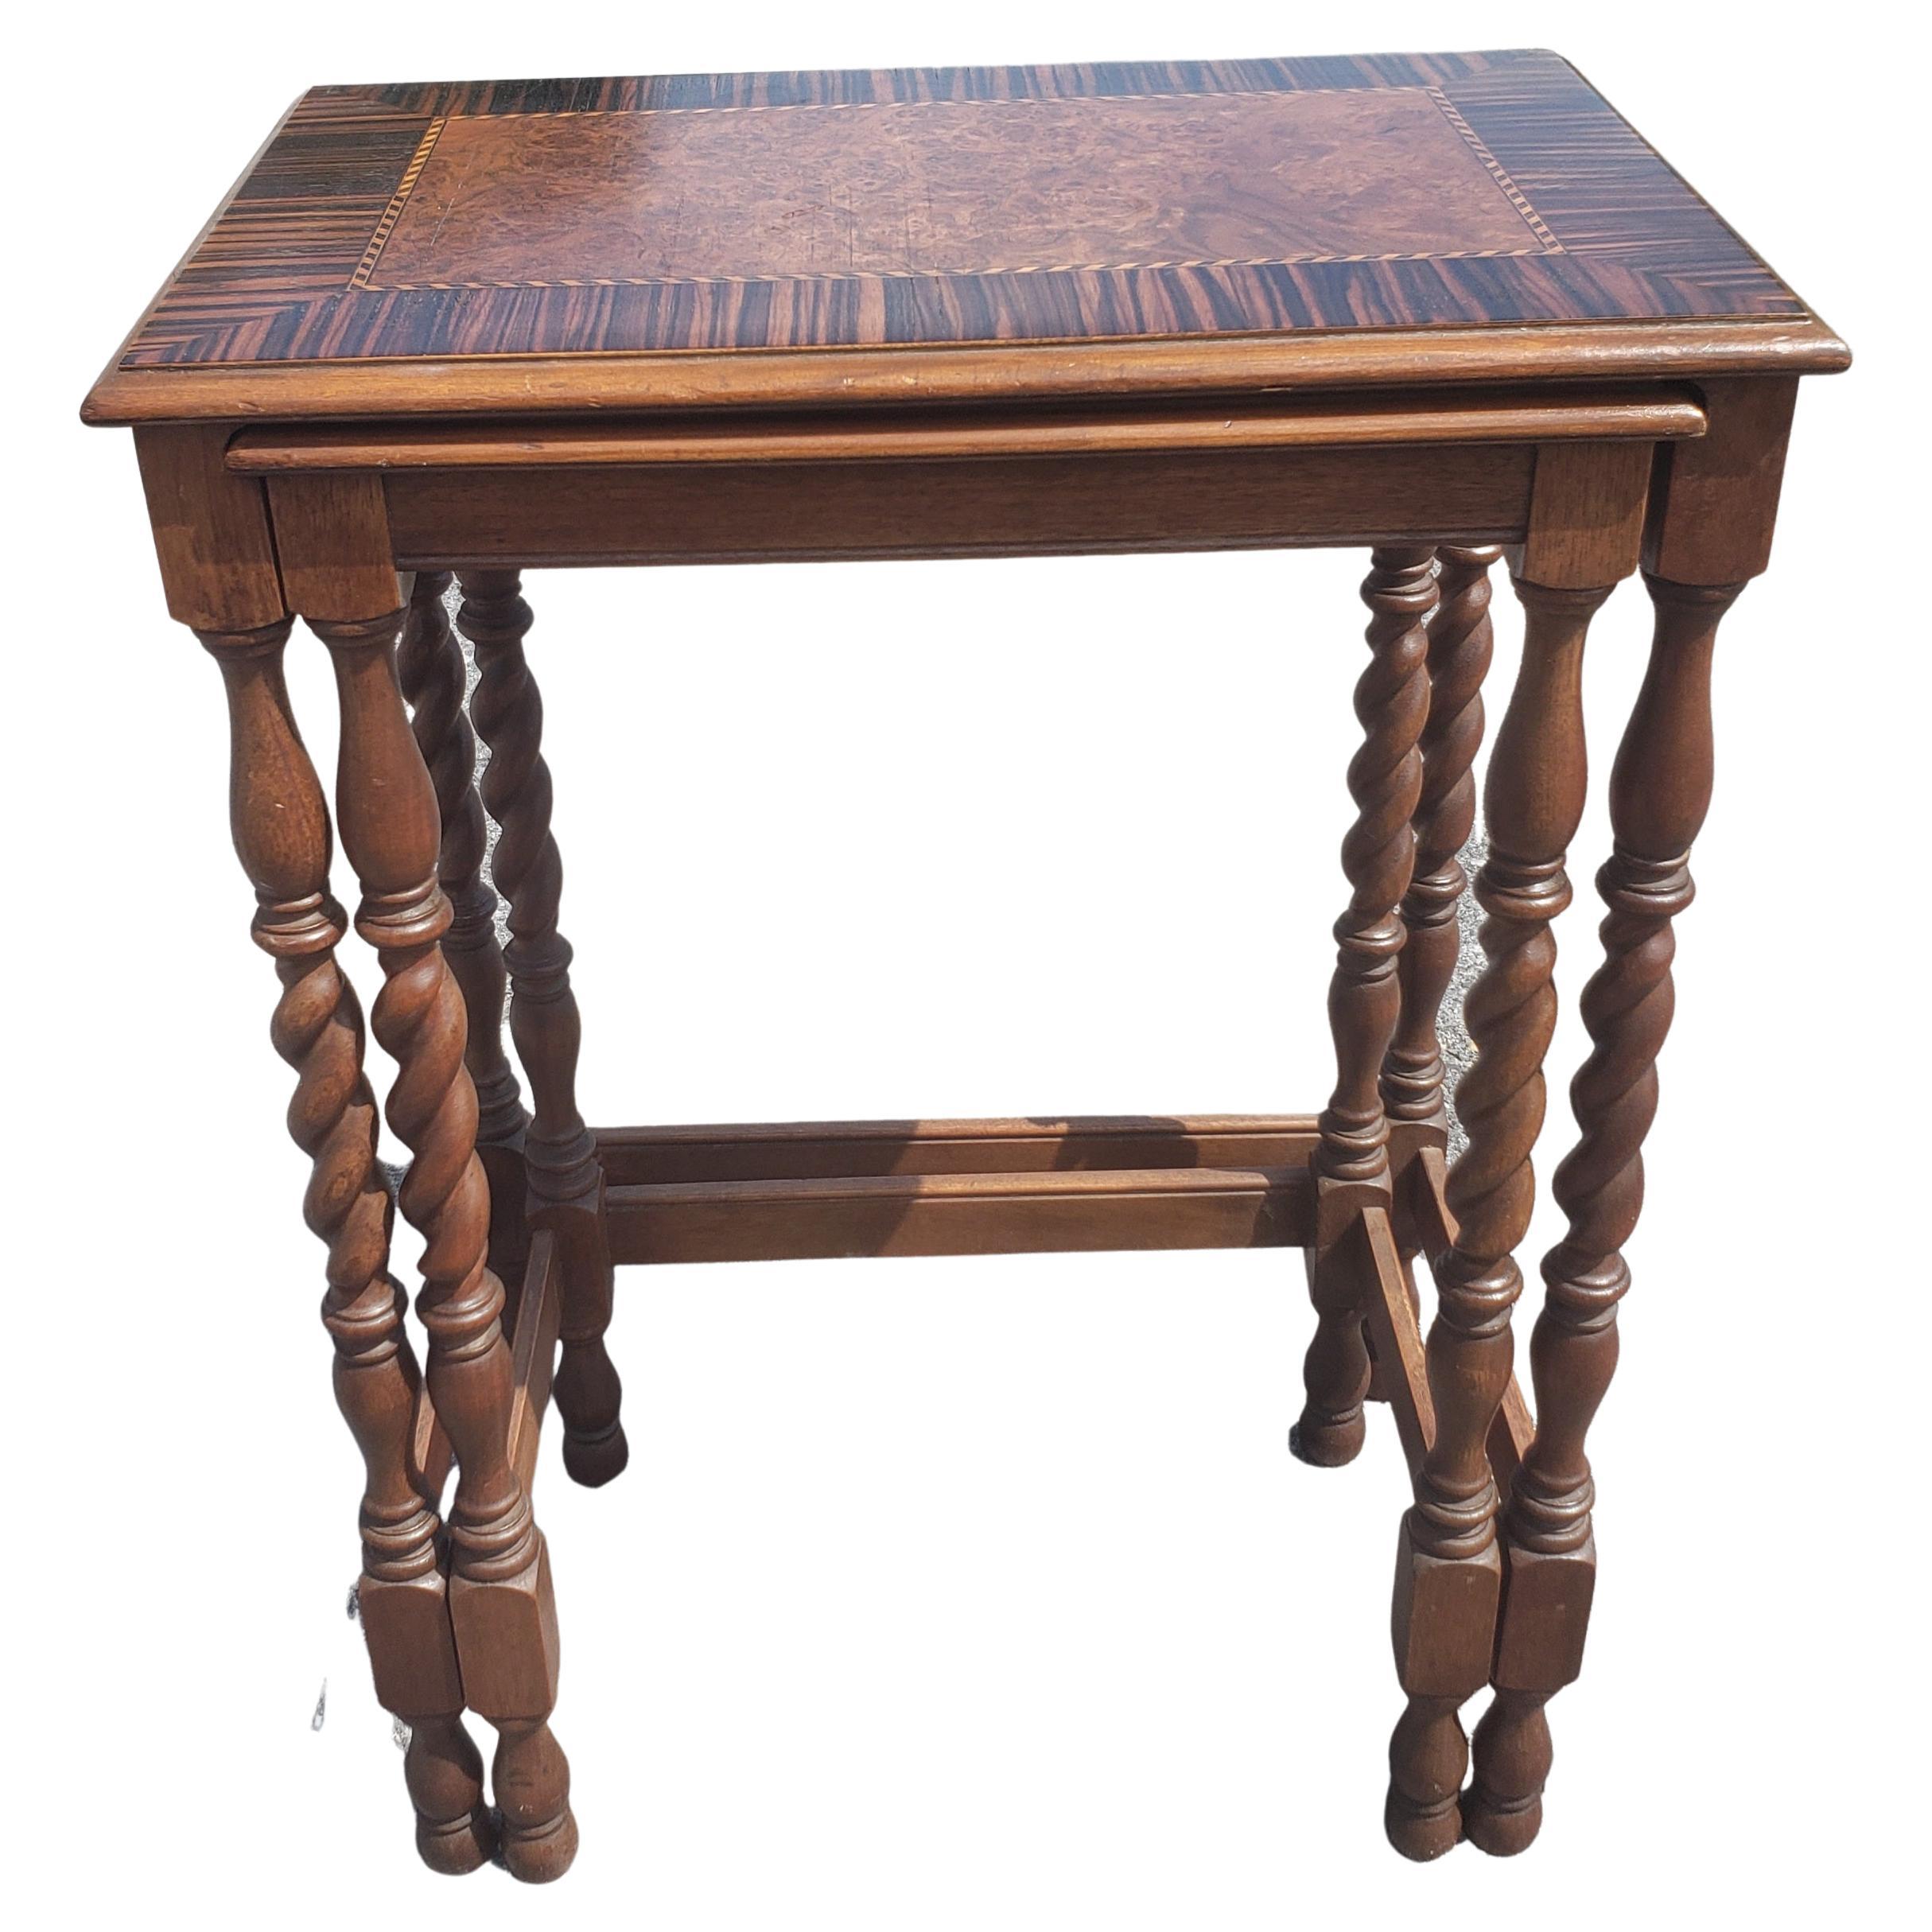 A beautiful pair of mahogany barley twist legs, inlaid banded and  burlwood top with a variety of fine woods such walnut, mahogany, kingwood, satinwood nesting tables in good vintage condition.
Larger table measures 18.25